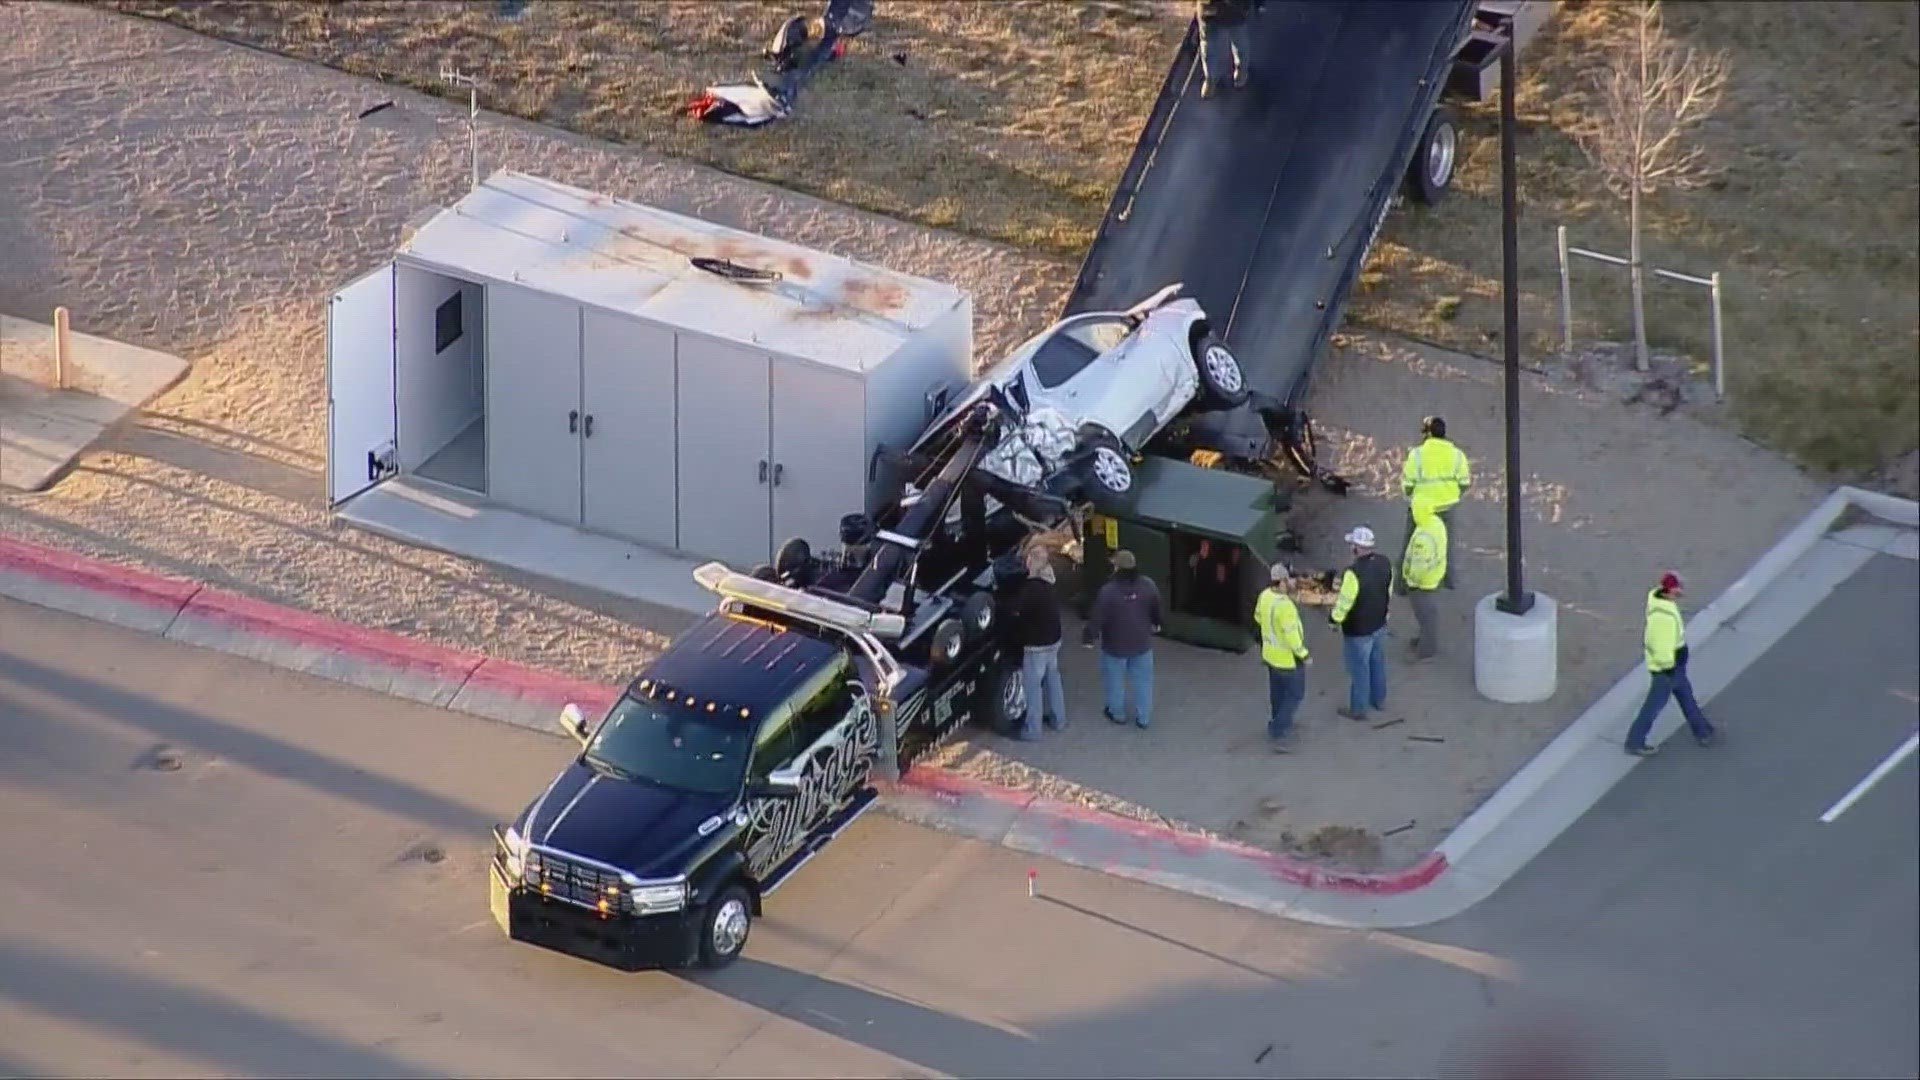 A speeding car veered off Interstate 76, rolled and crashed into a transformer box. Police in Brighton, Colorado, are investigating the double fatal crash Thursday.